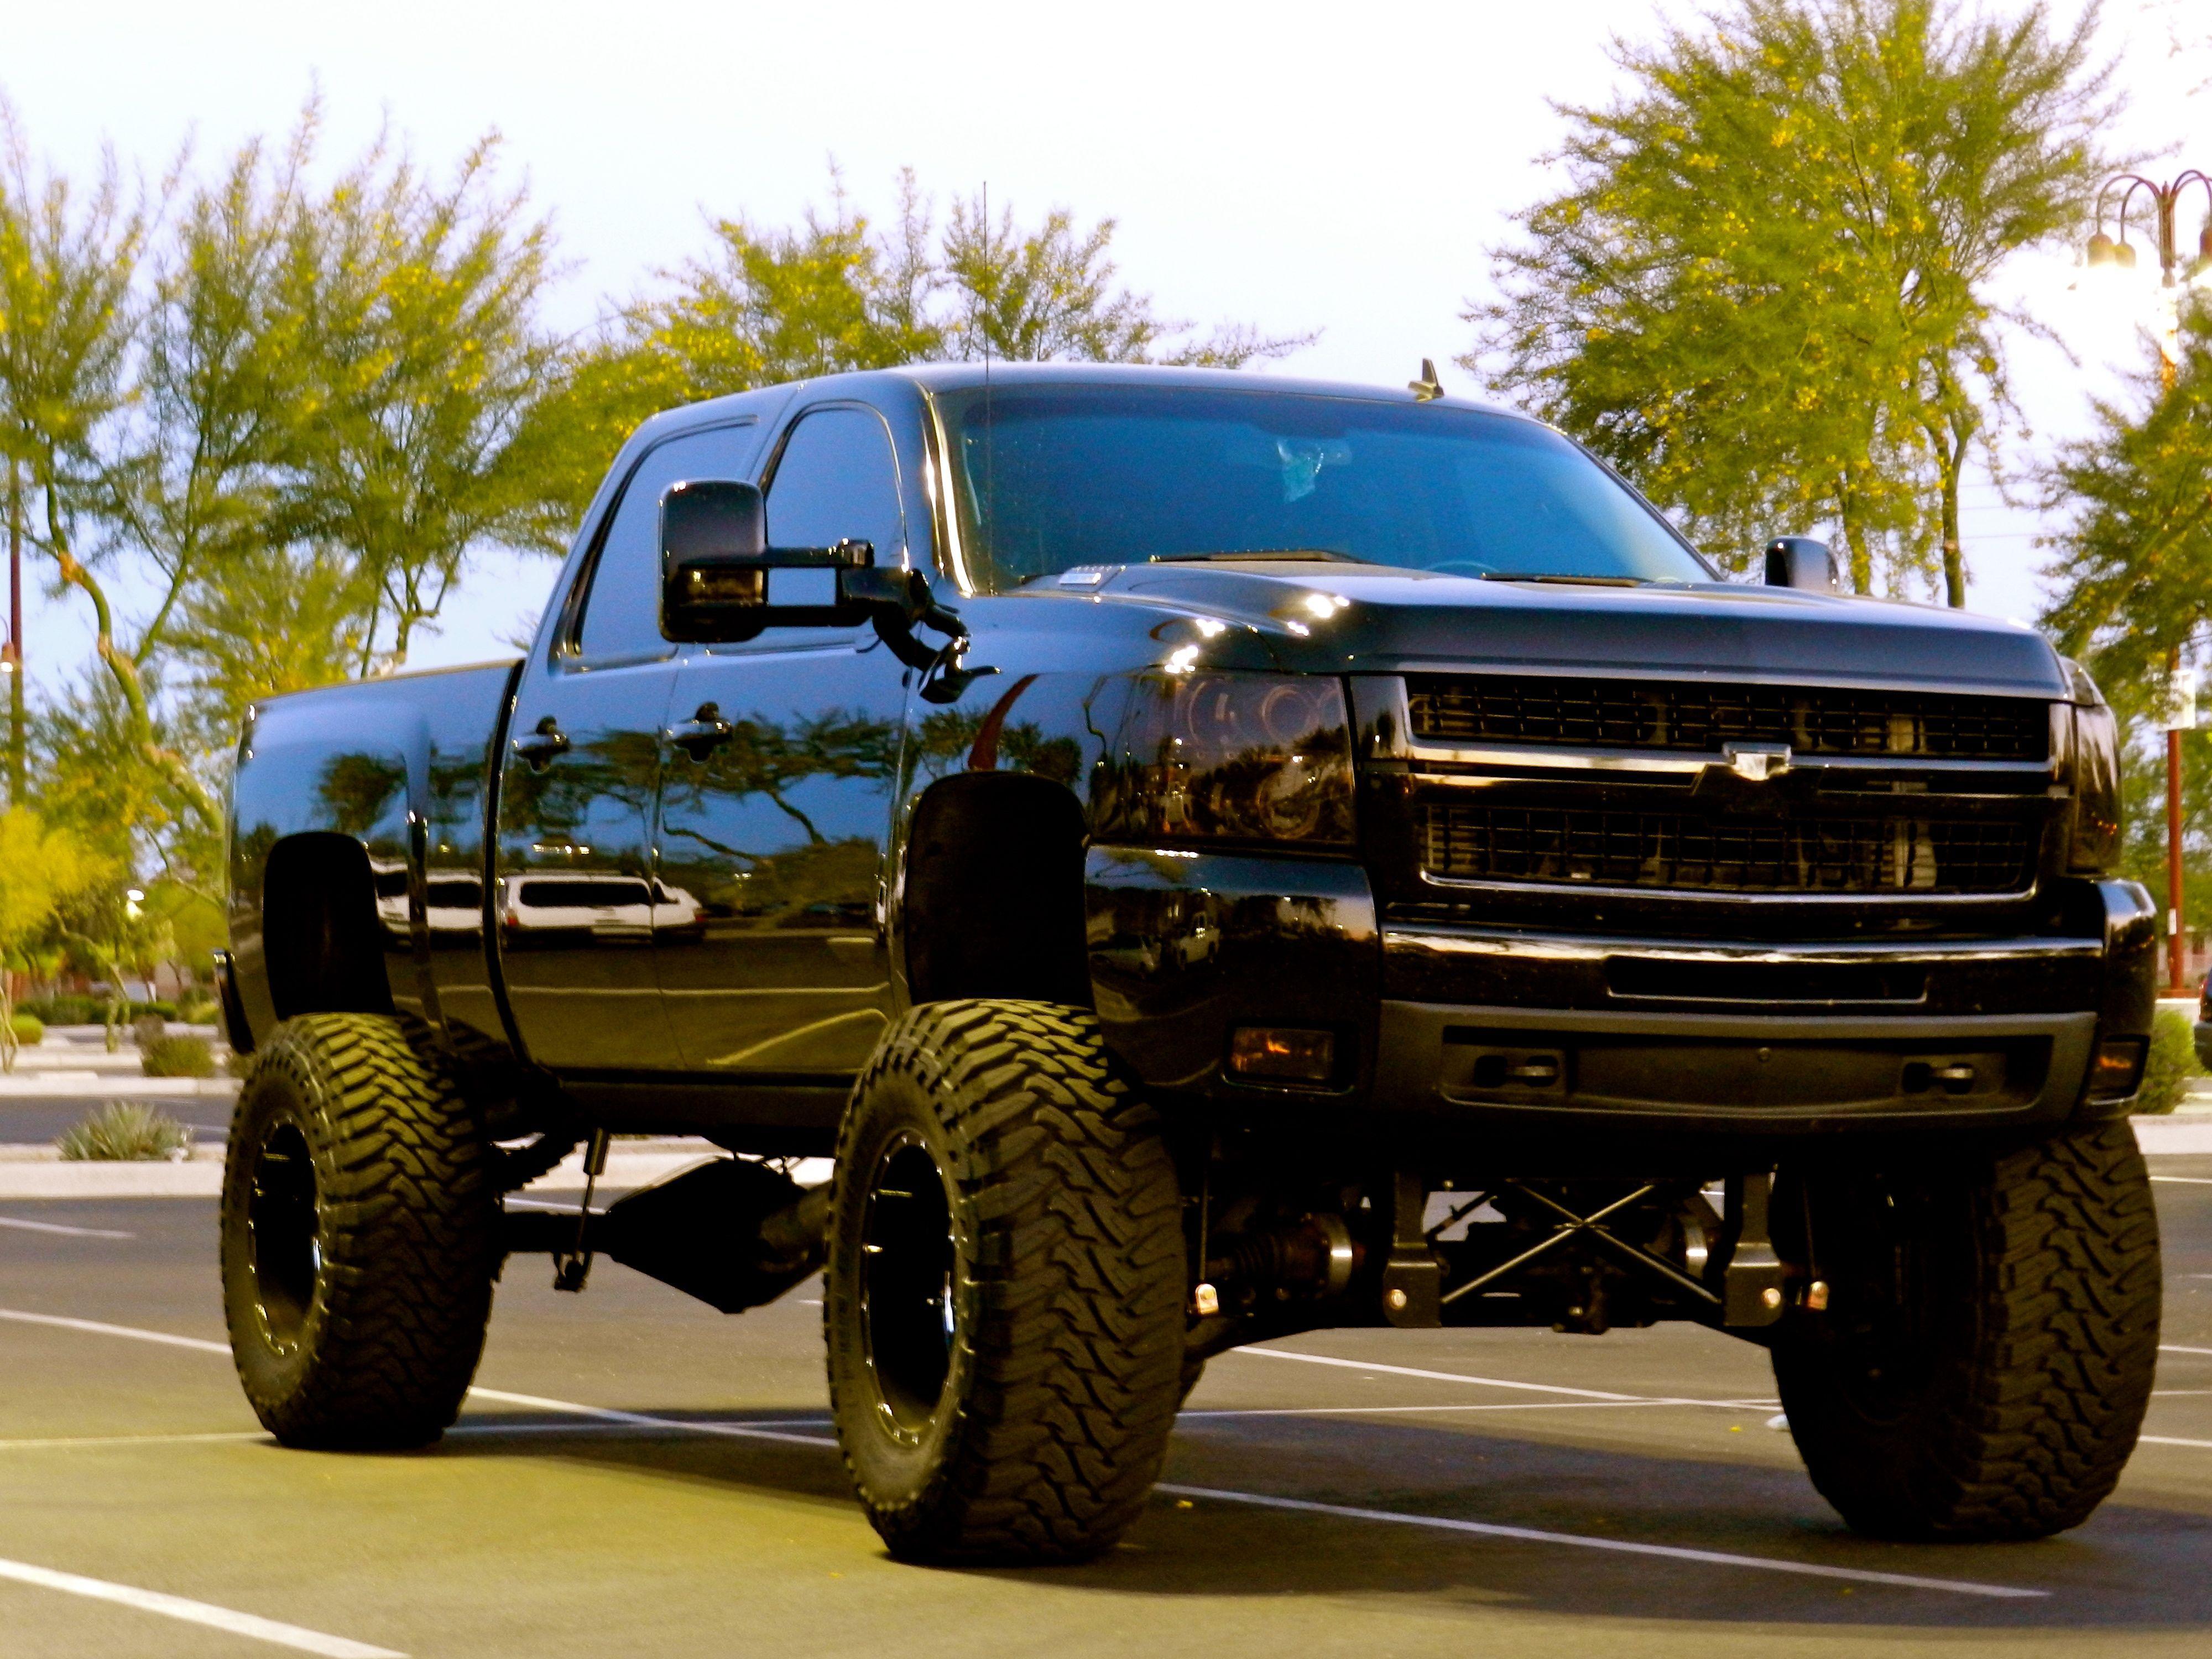 best image about Chevy Trucks. Chevy, Chevy